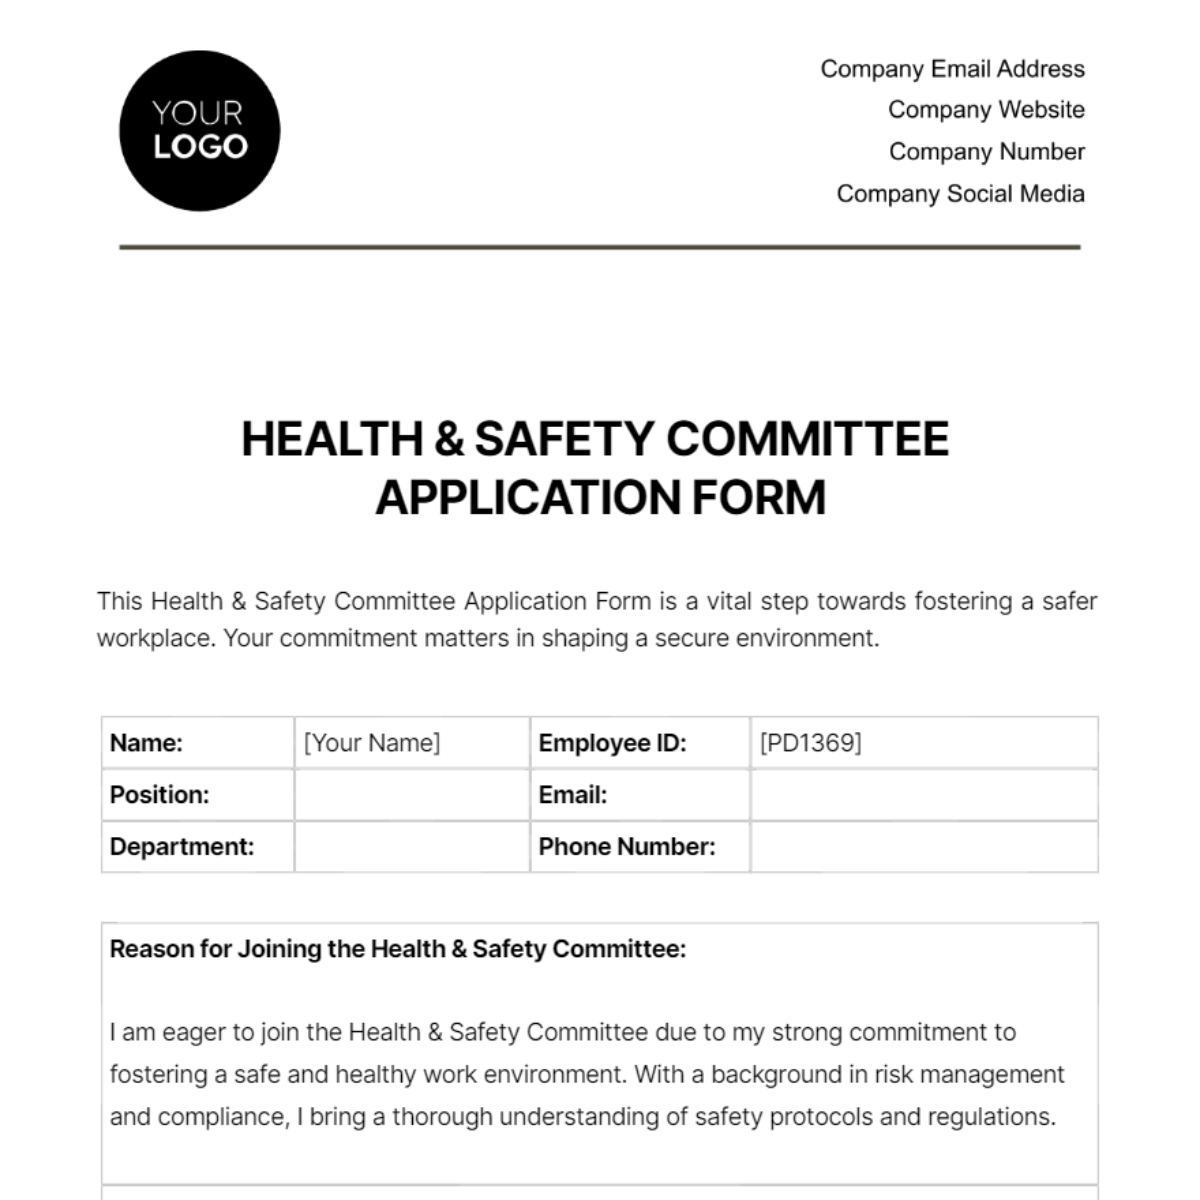 Free Health & Safety Committee Application Form Template